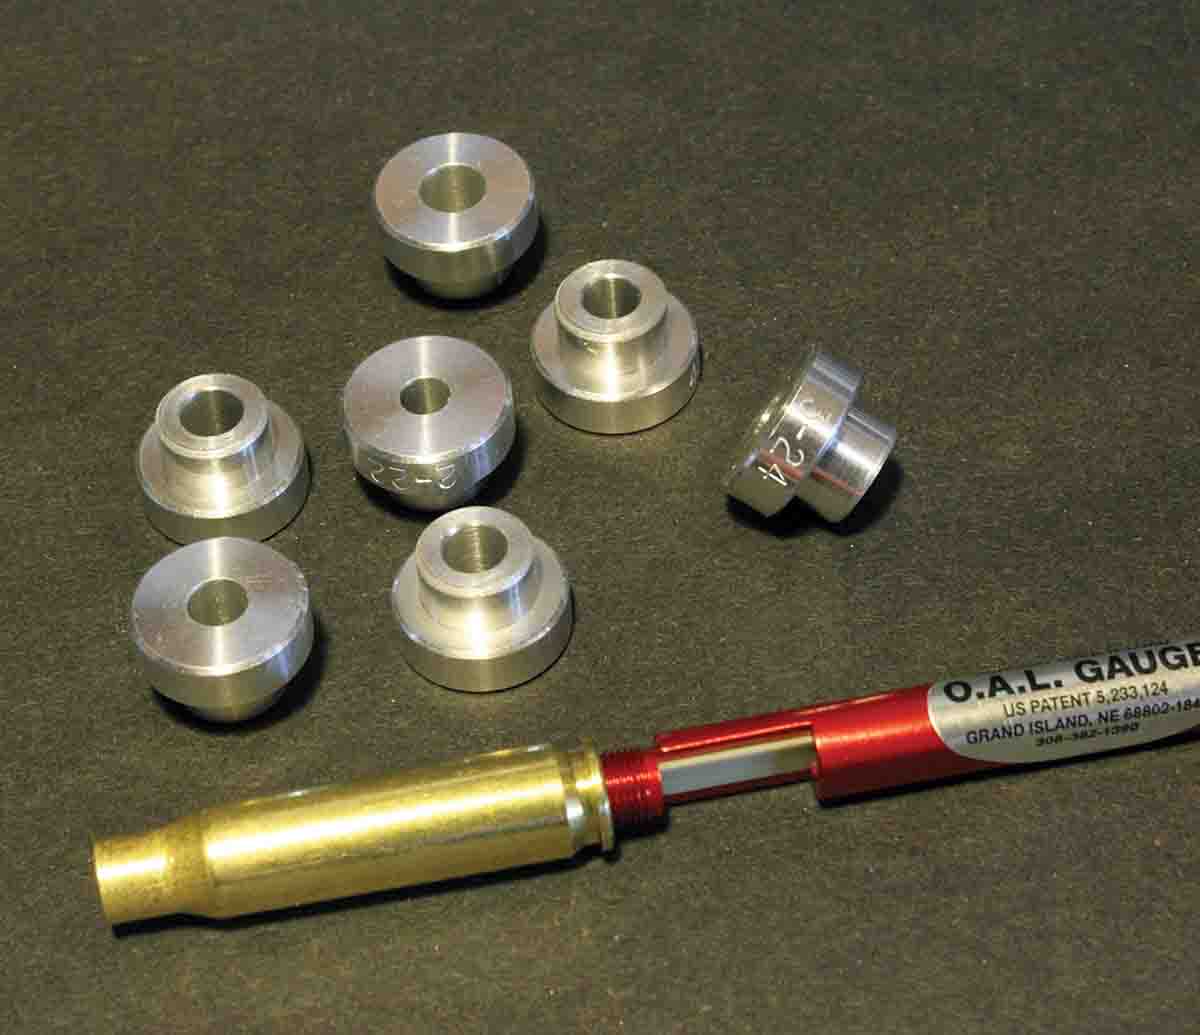 Determine seating depth with the Hornady tool with a threaded-base case (here a .308 Winchester) and a selection of ogive bushings. Neither are very expensive and can often be found at gun stores.